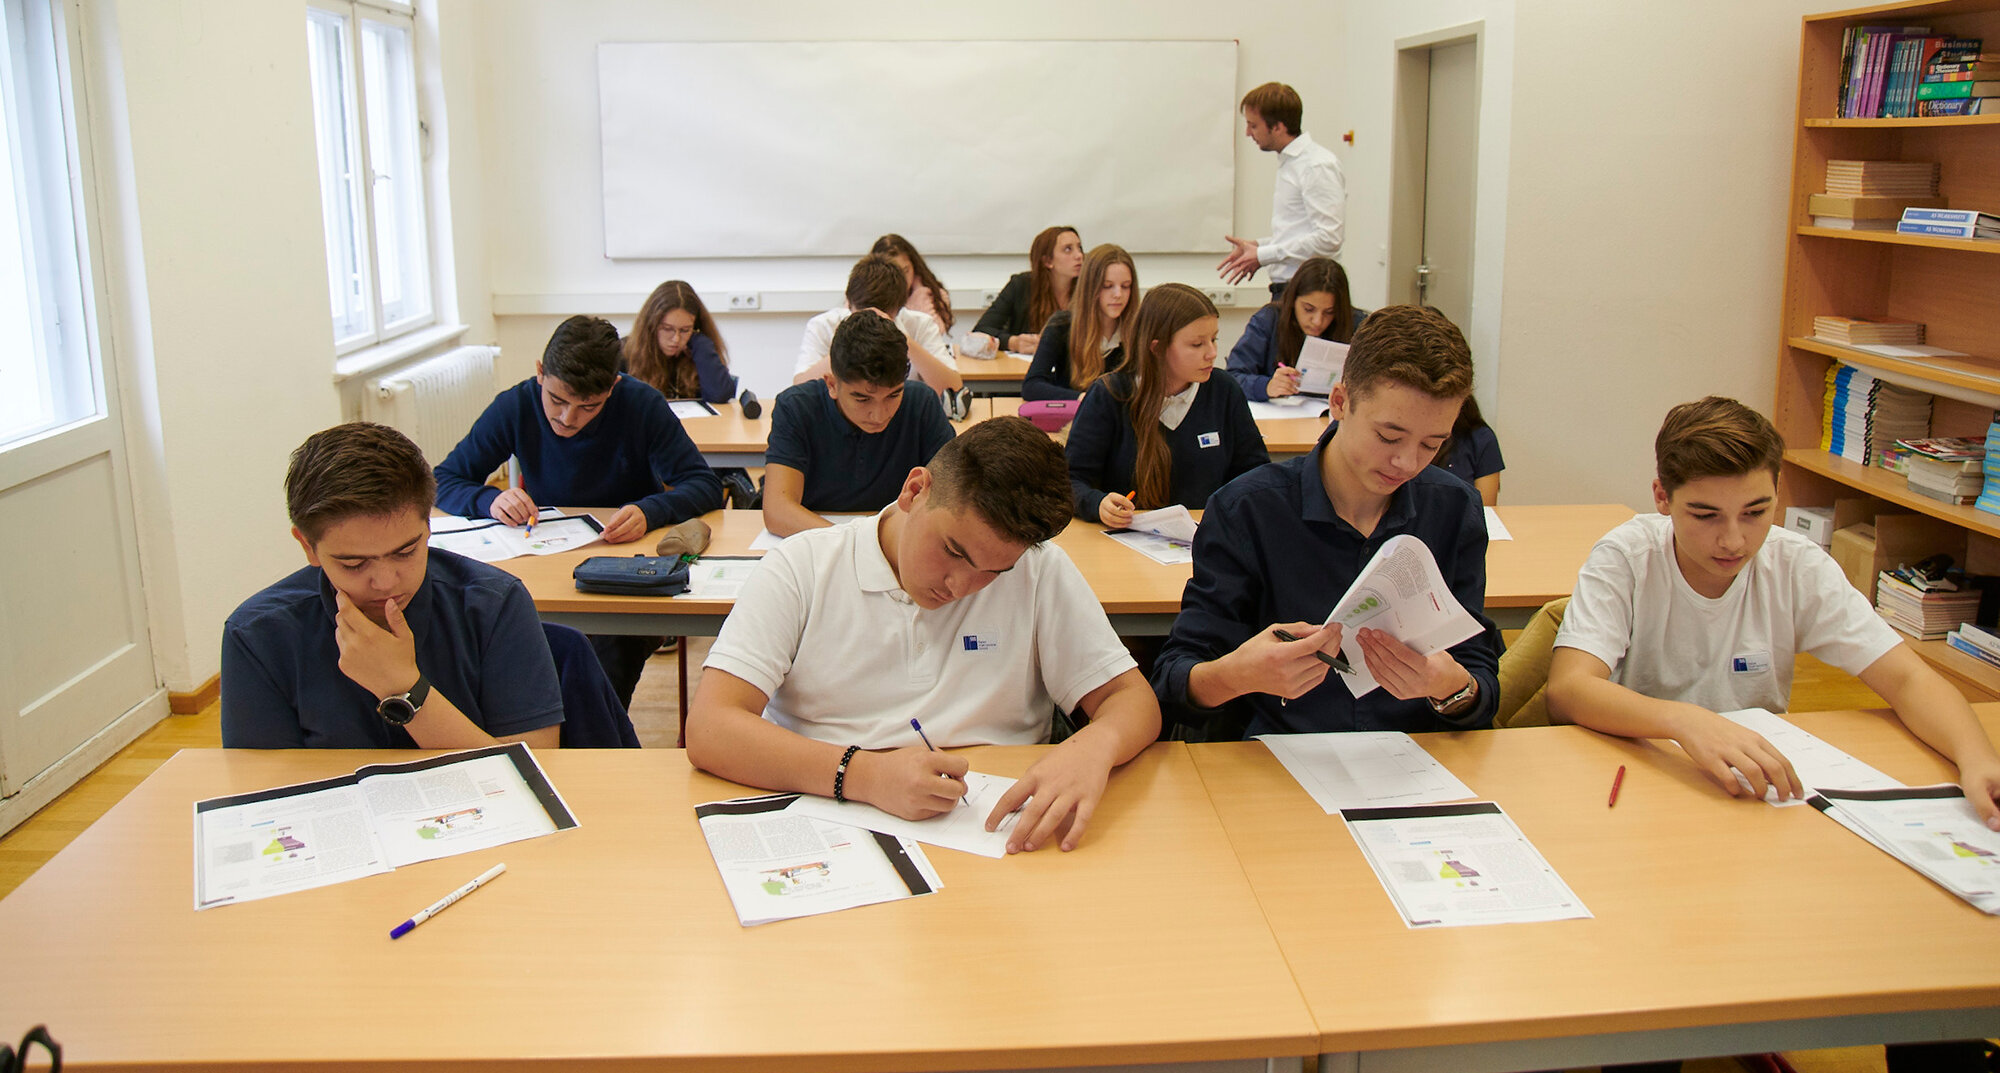 Students sit at four rows of tables in the classroom and work on worksheets. 